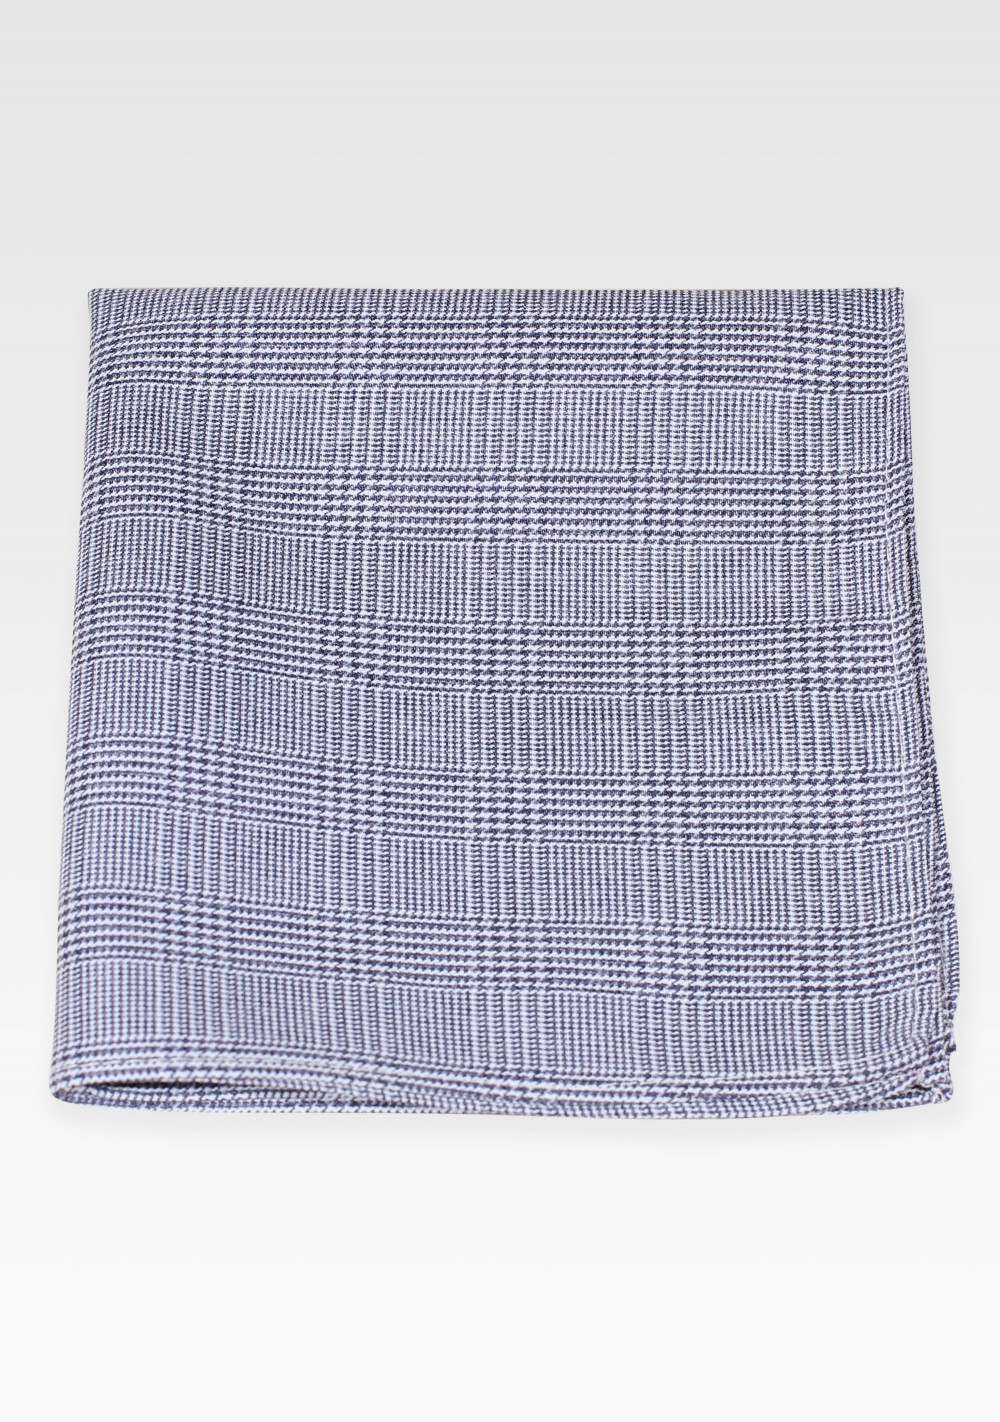 Prince of Wales Check Cotton Hanky in Navy